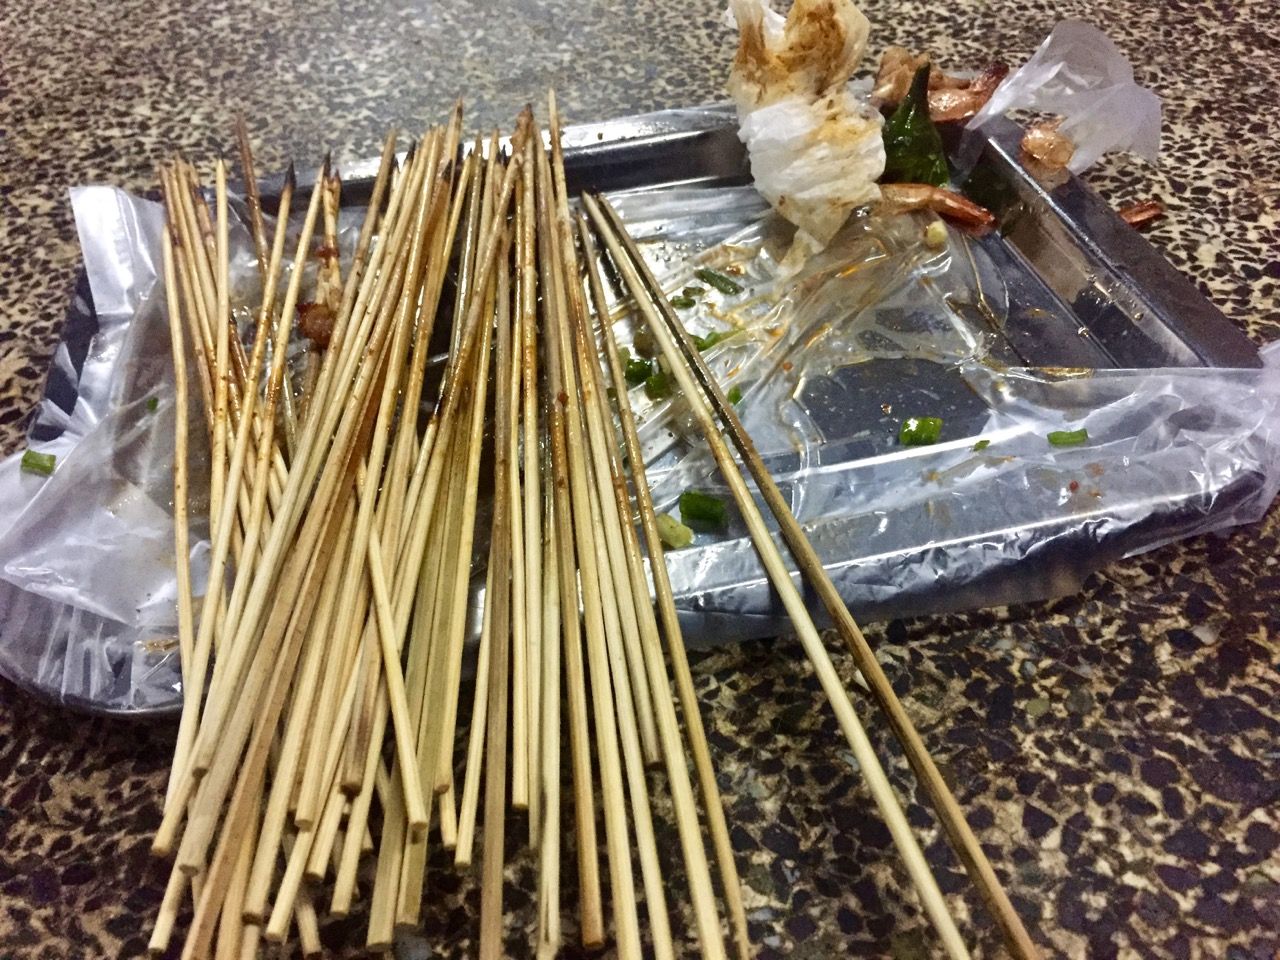 Empty, used skewers on a tray.